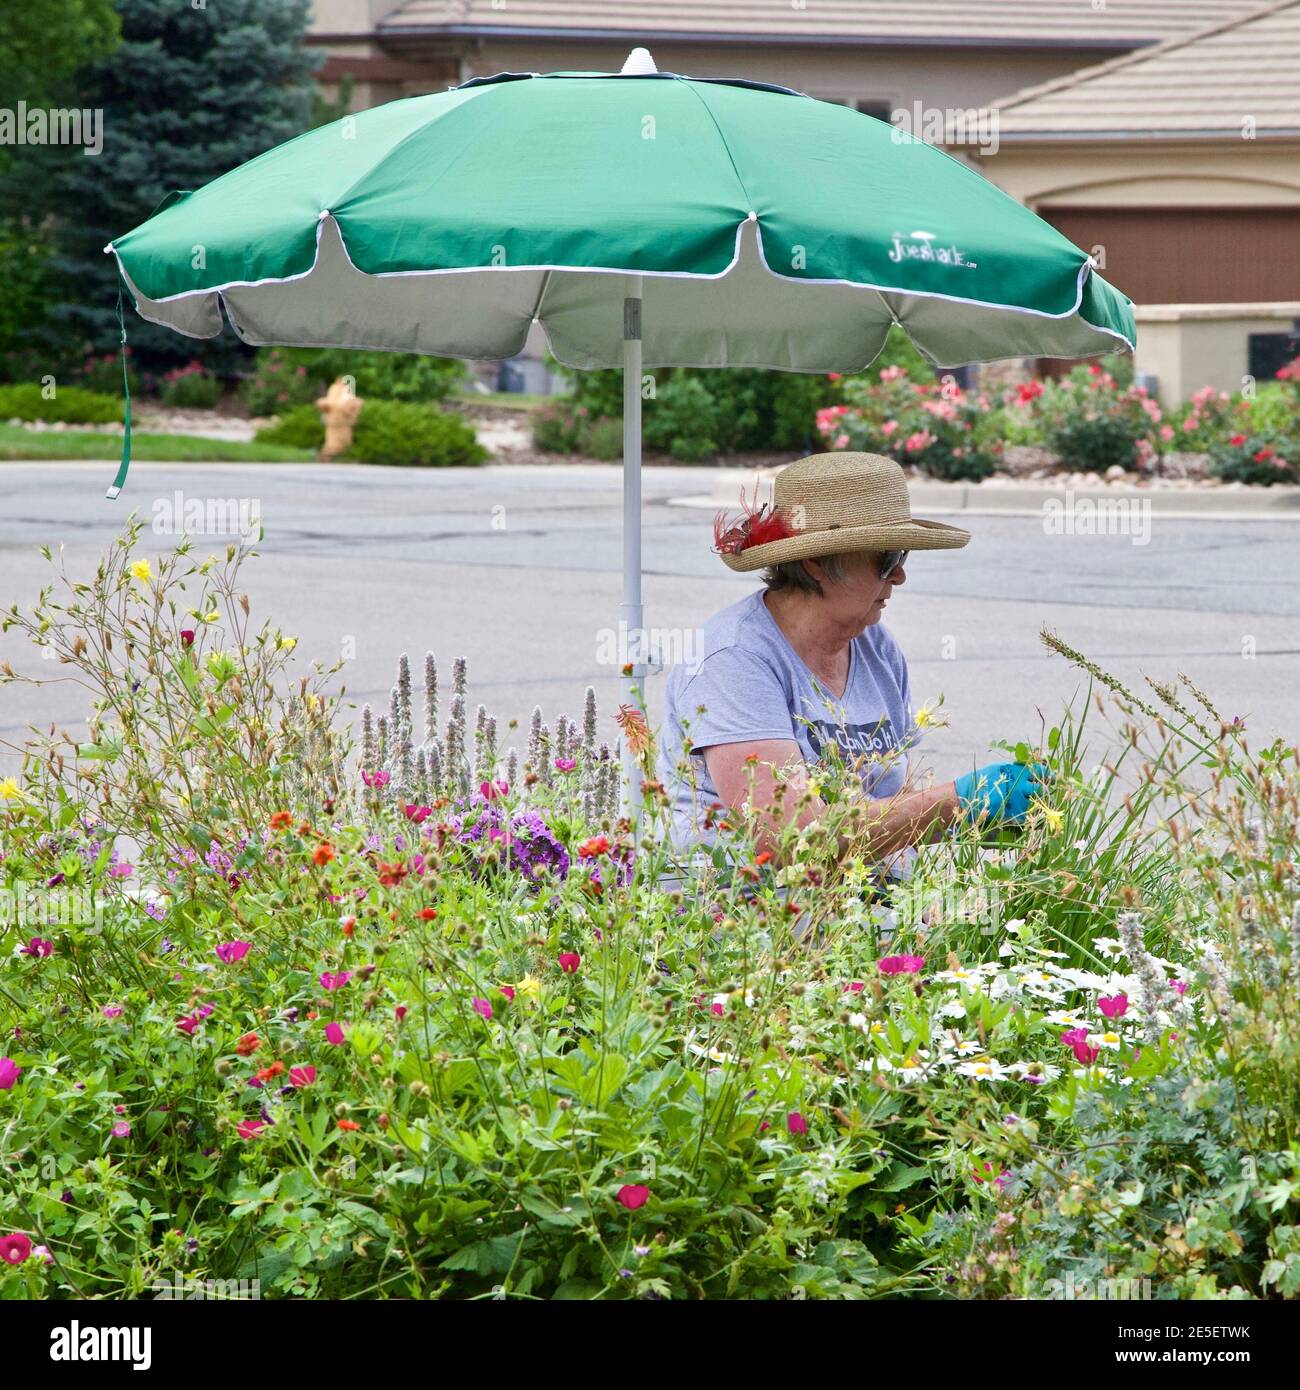 A lady gardener is diligently working in her garden protected from the hot summer sun by an umbrella and a hat. Stock Photo